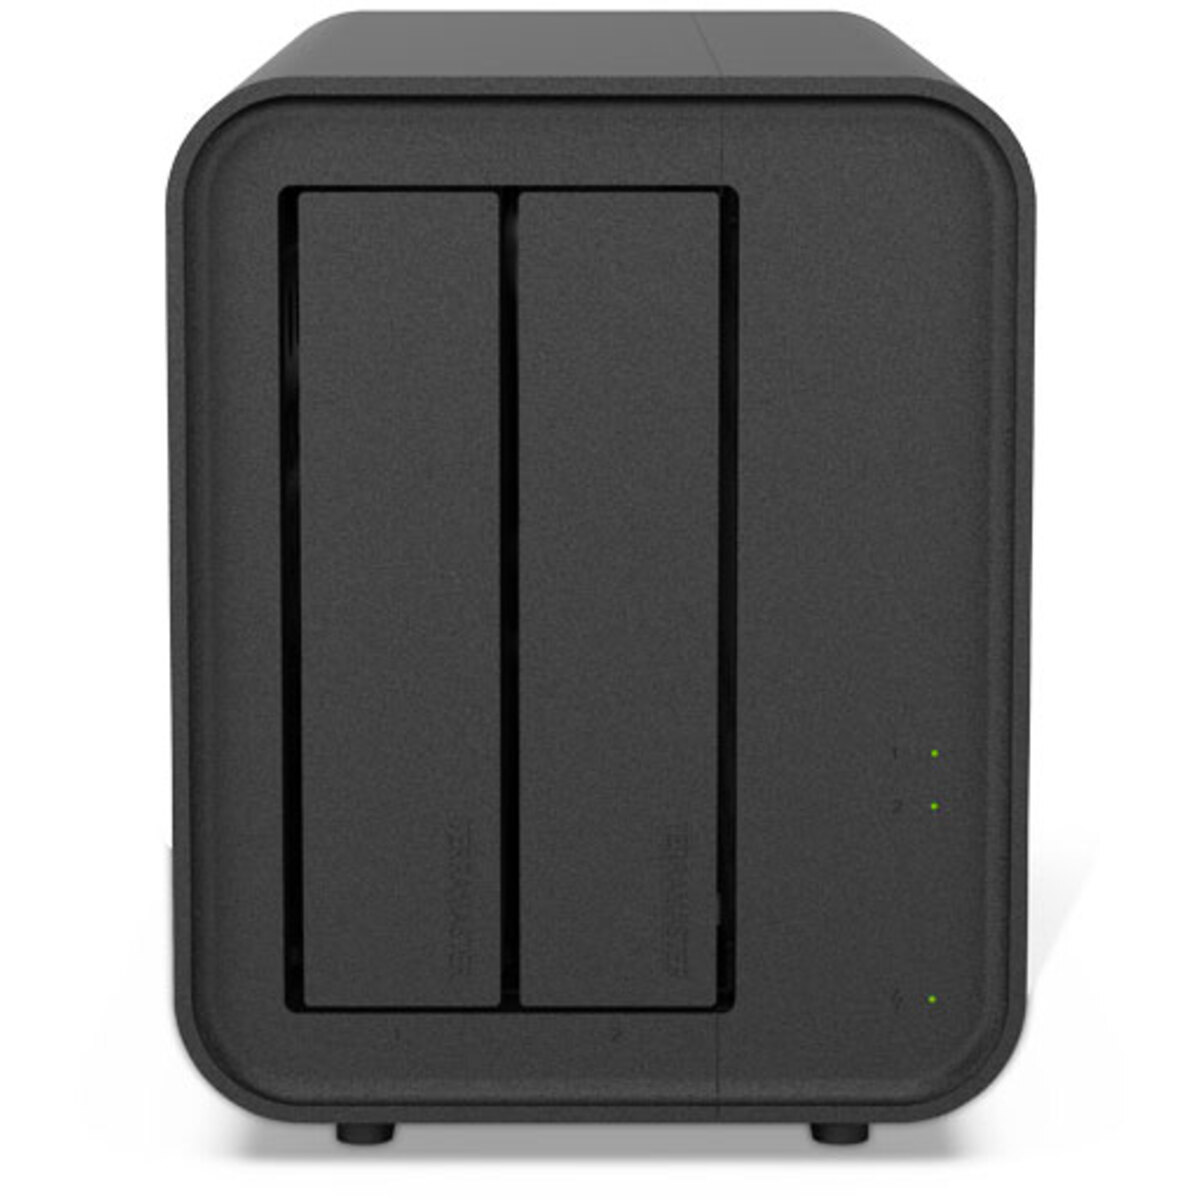 TerraMaster D5 Hybrid 16tb 2-Bay Desktop Multimedia / Power User / Business DAS - Direct Attached Storage Device 2x8tb Seagate IronWolf Pro ST8000NT001 3.5 7200rpm SATA 6Gb/s HDD NAS Class Drives Installed - Burn-In Tested - ON SALE D5 Hybrid